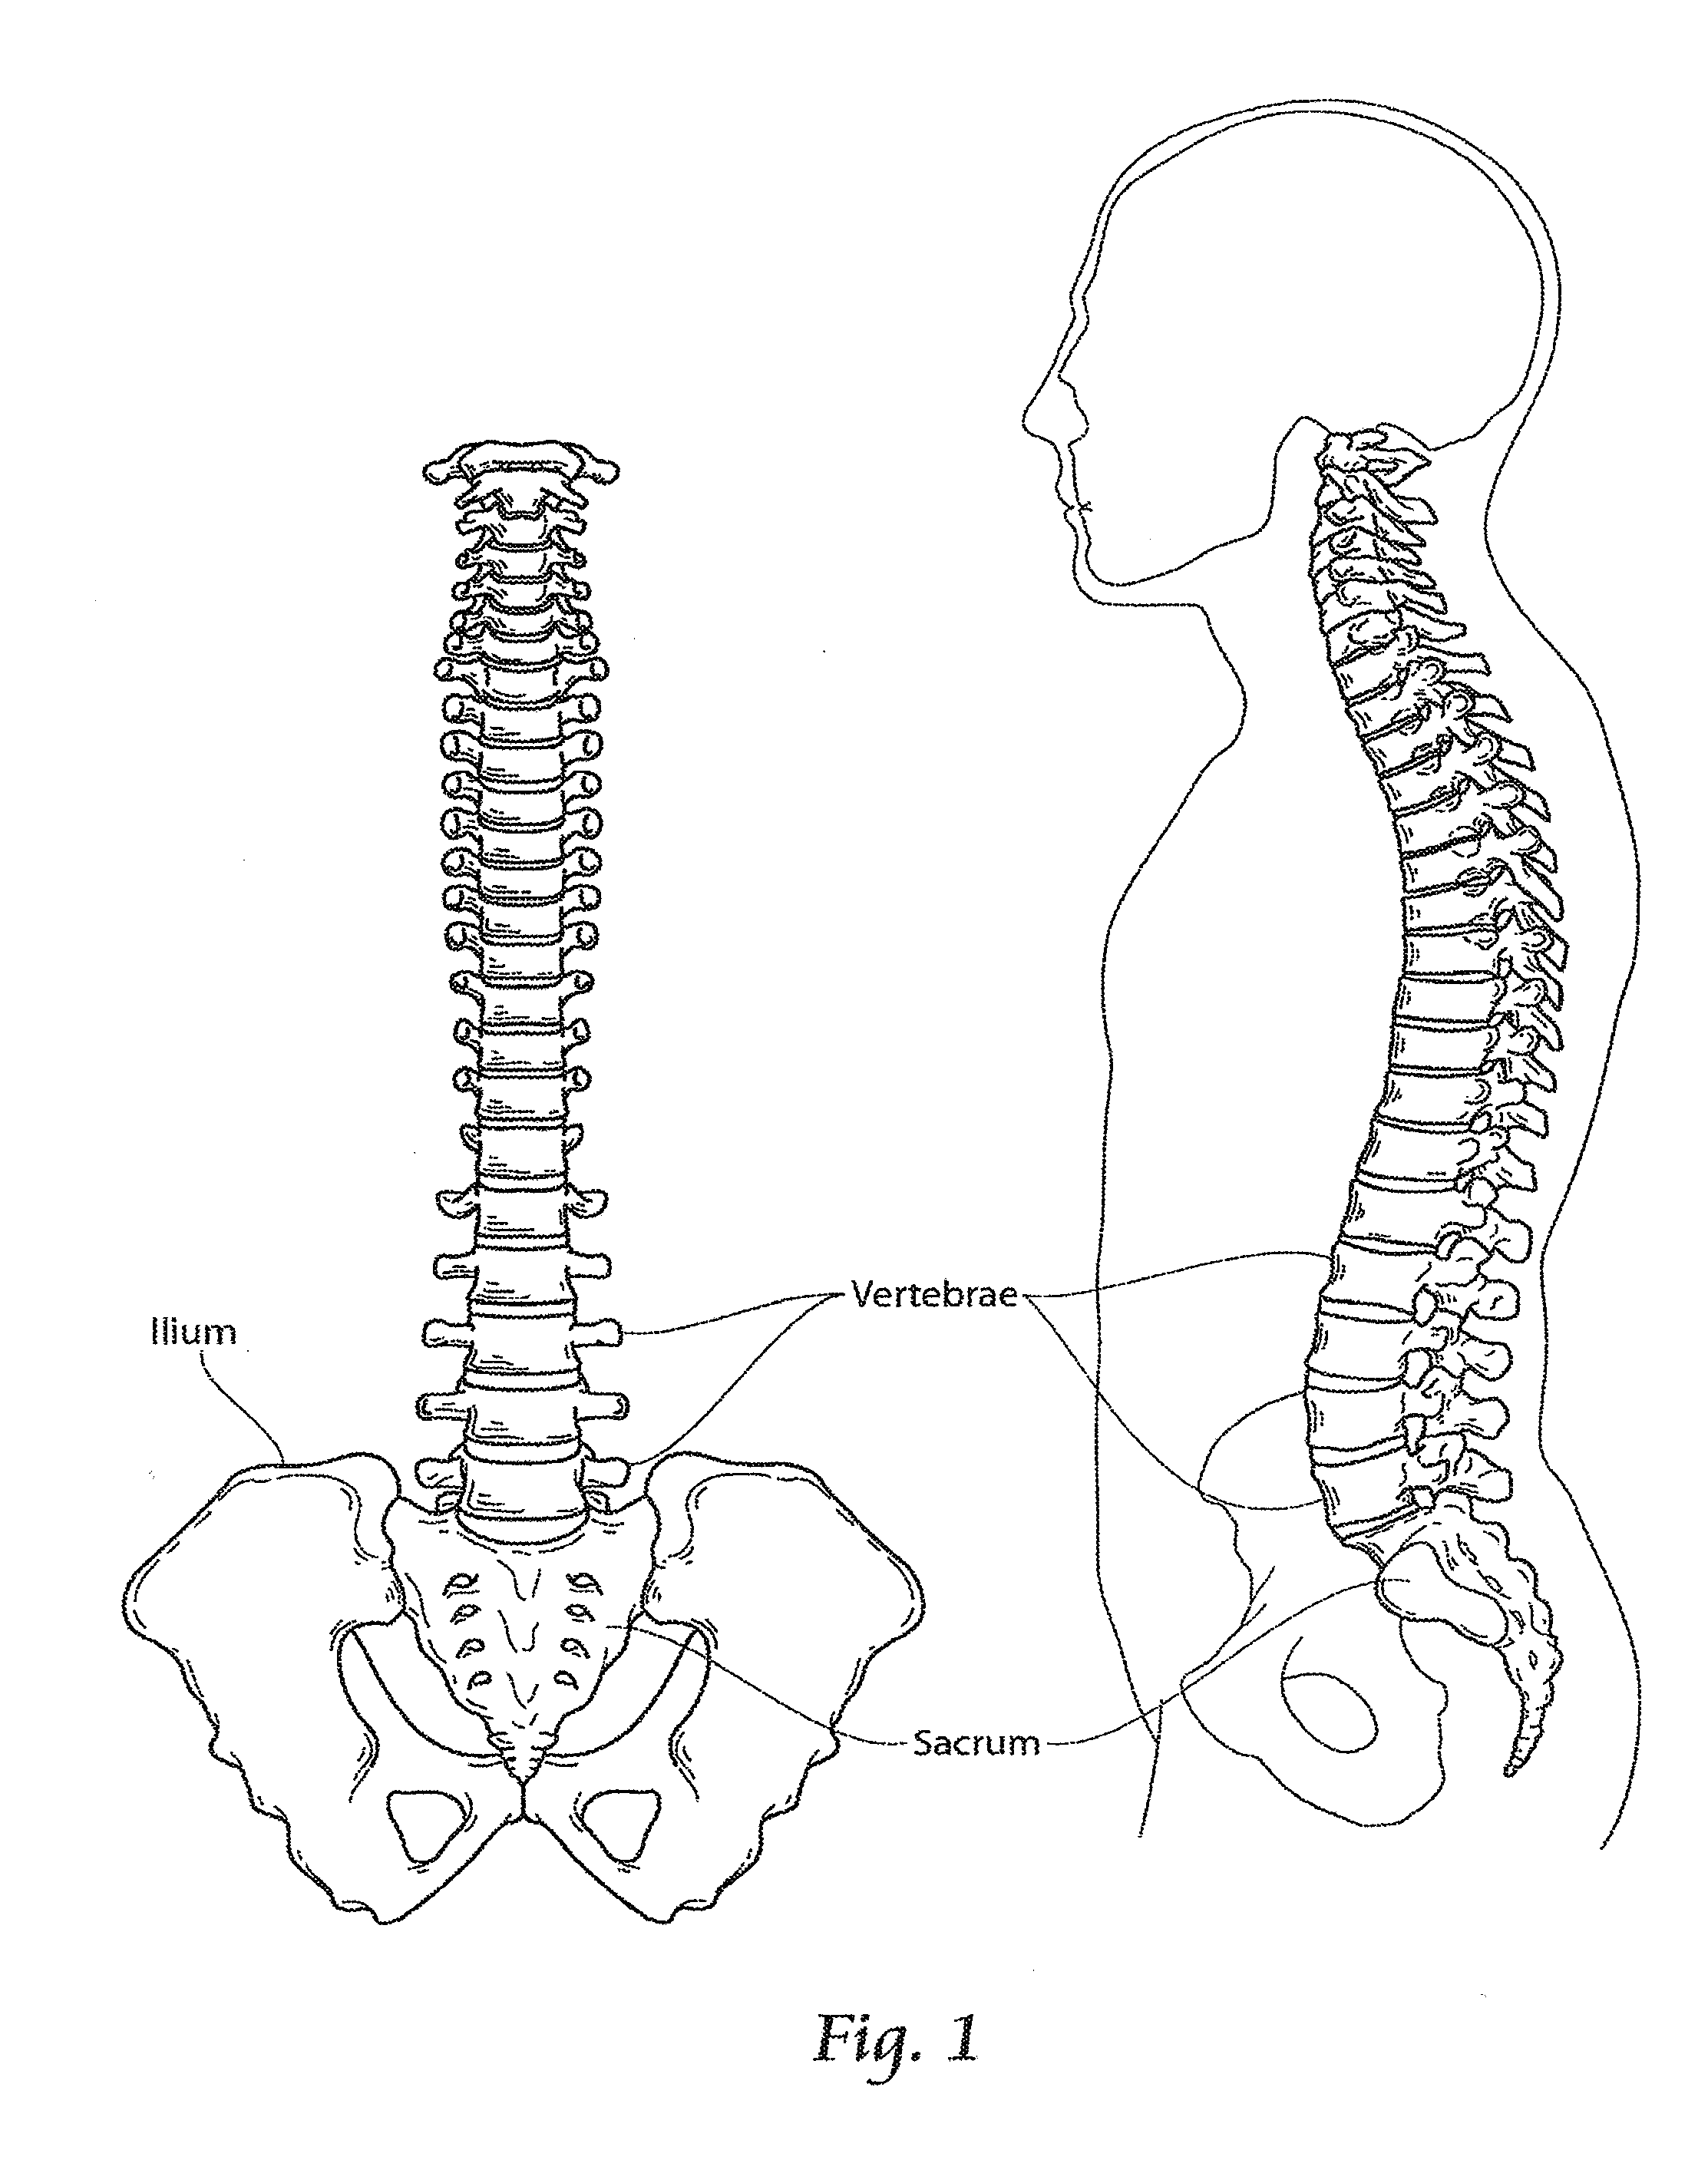 Apparatus, systems and methods for achieving anterior lumbar interbody fusion